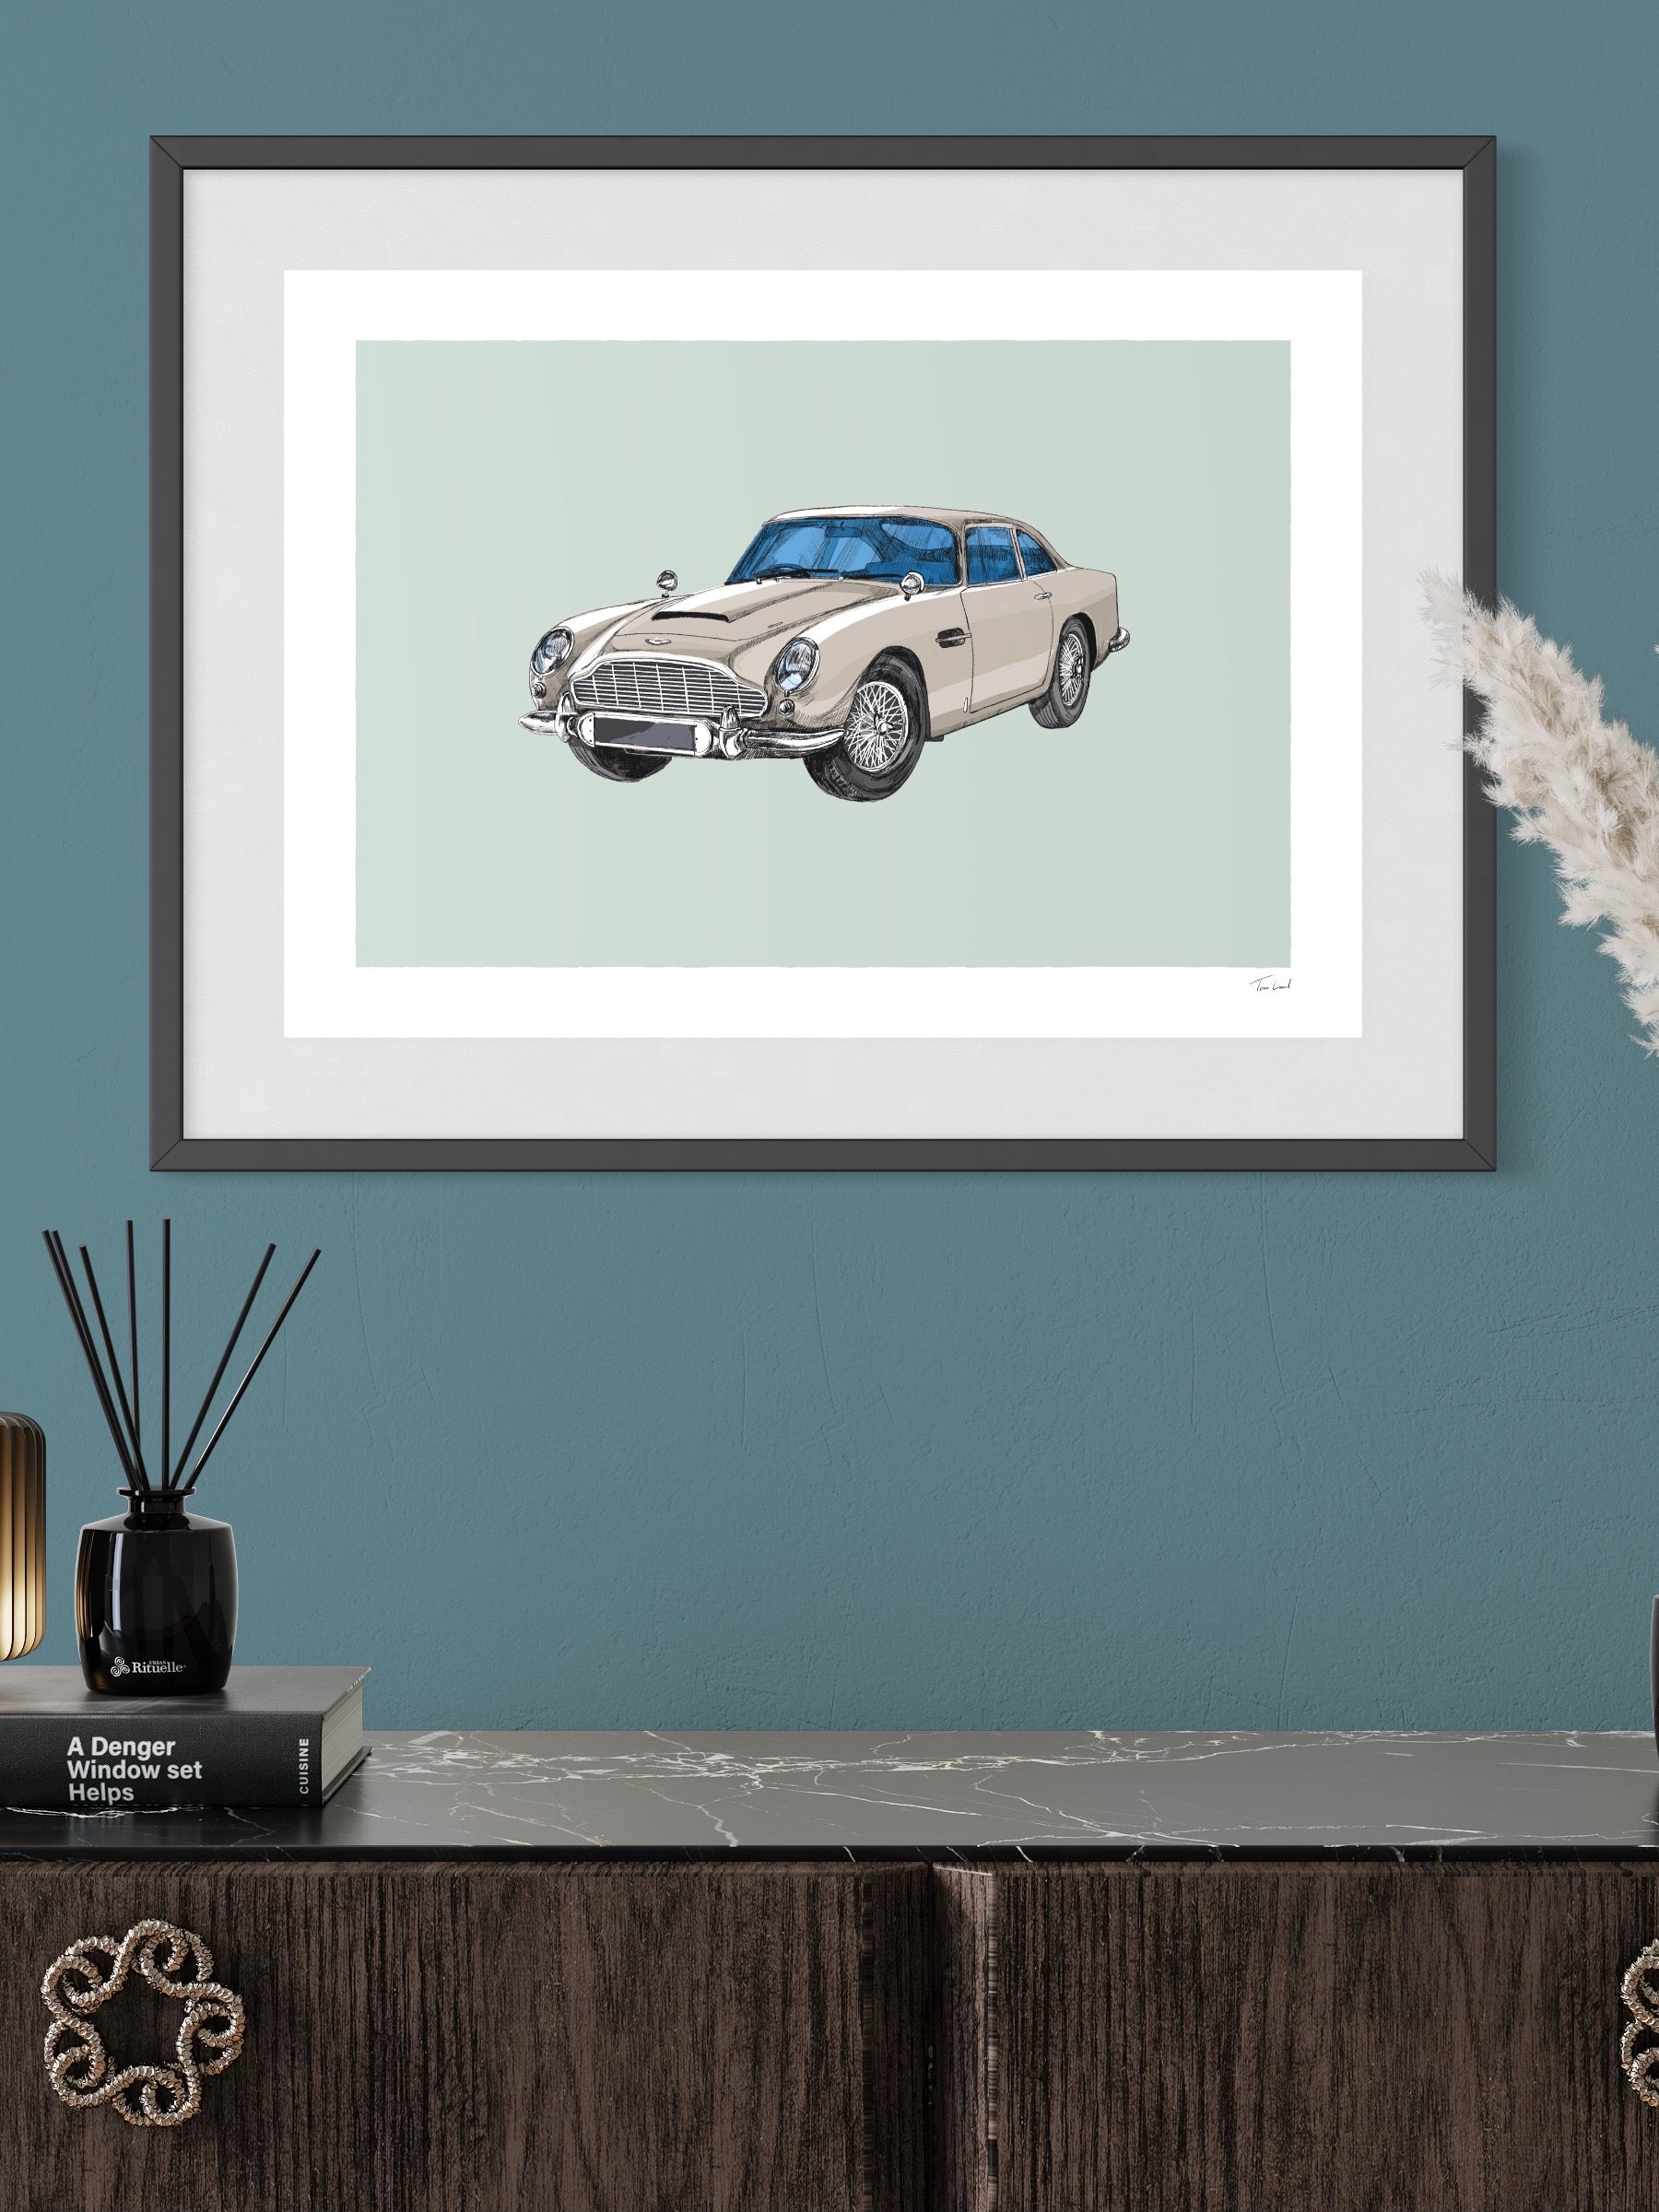 This image shows a giclee wall art print by Tom Laird Illustration of the British classic car, the Aston Martin DB5, framed in a beautiful living room with tasteful modern home decor. This art print of a silver example is available from Tom Laird Illustration in a variety of sizes.